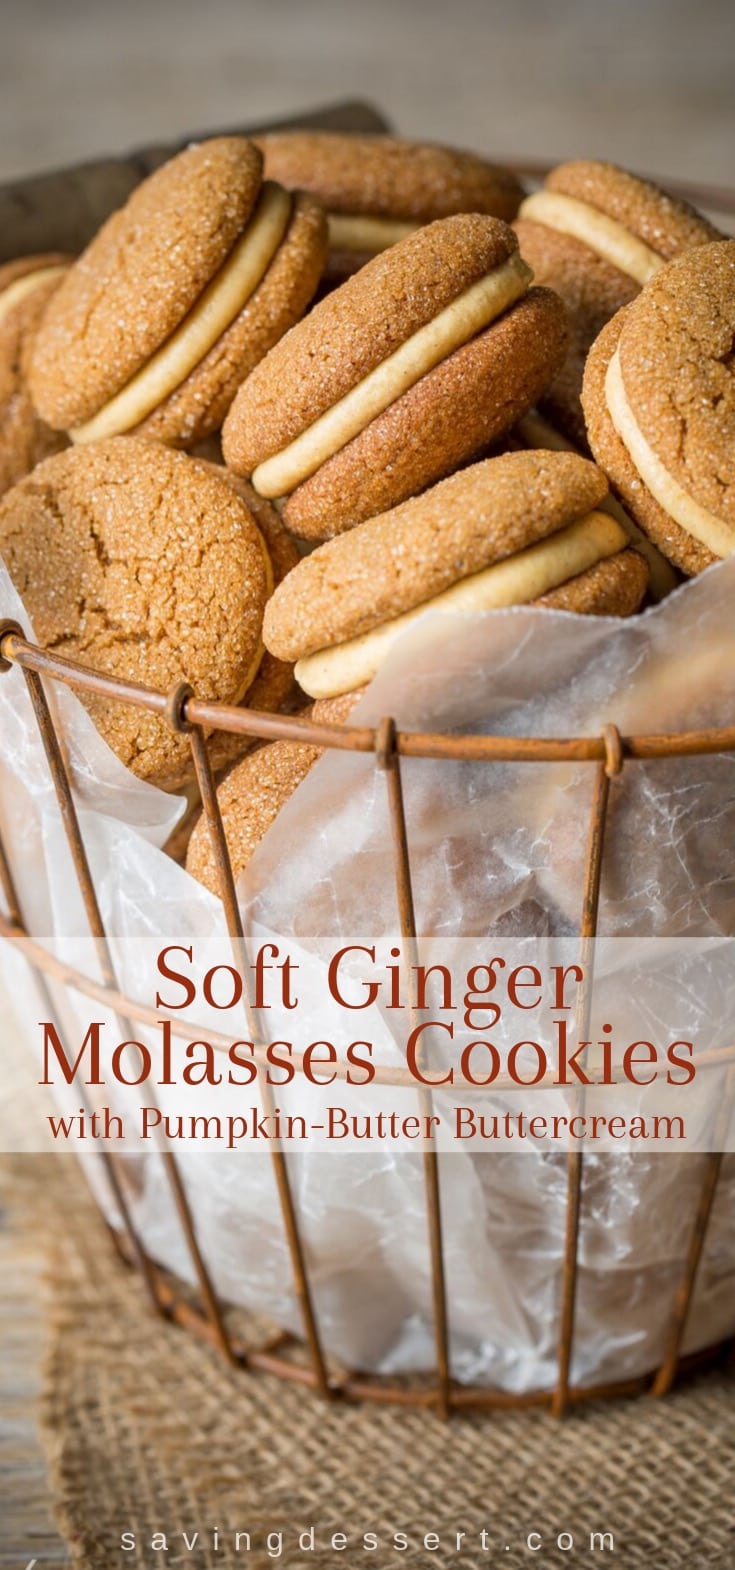 A basket filled with soft ginger molasses cookies